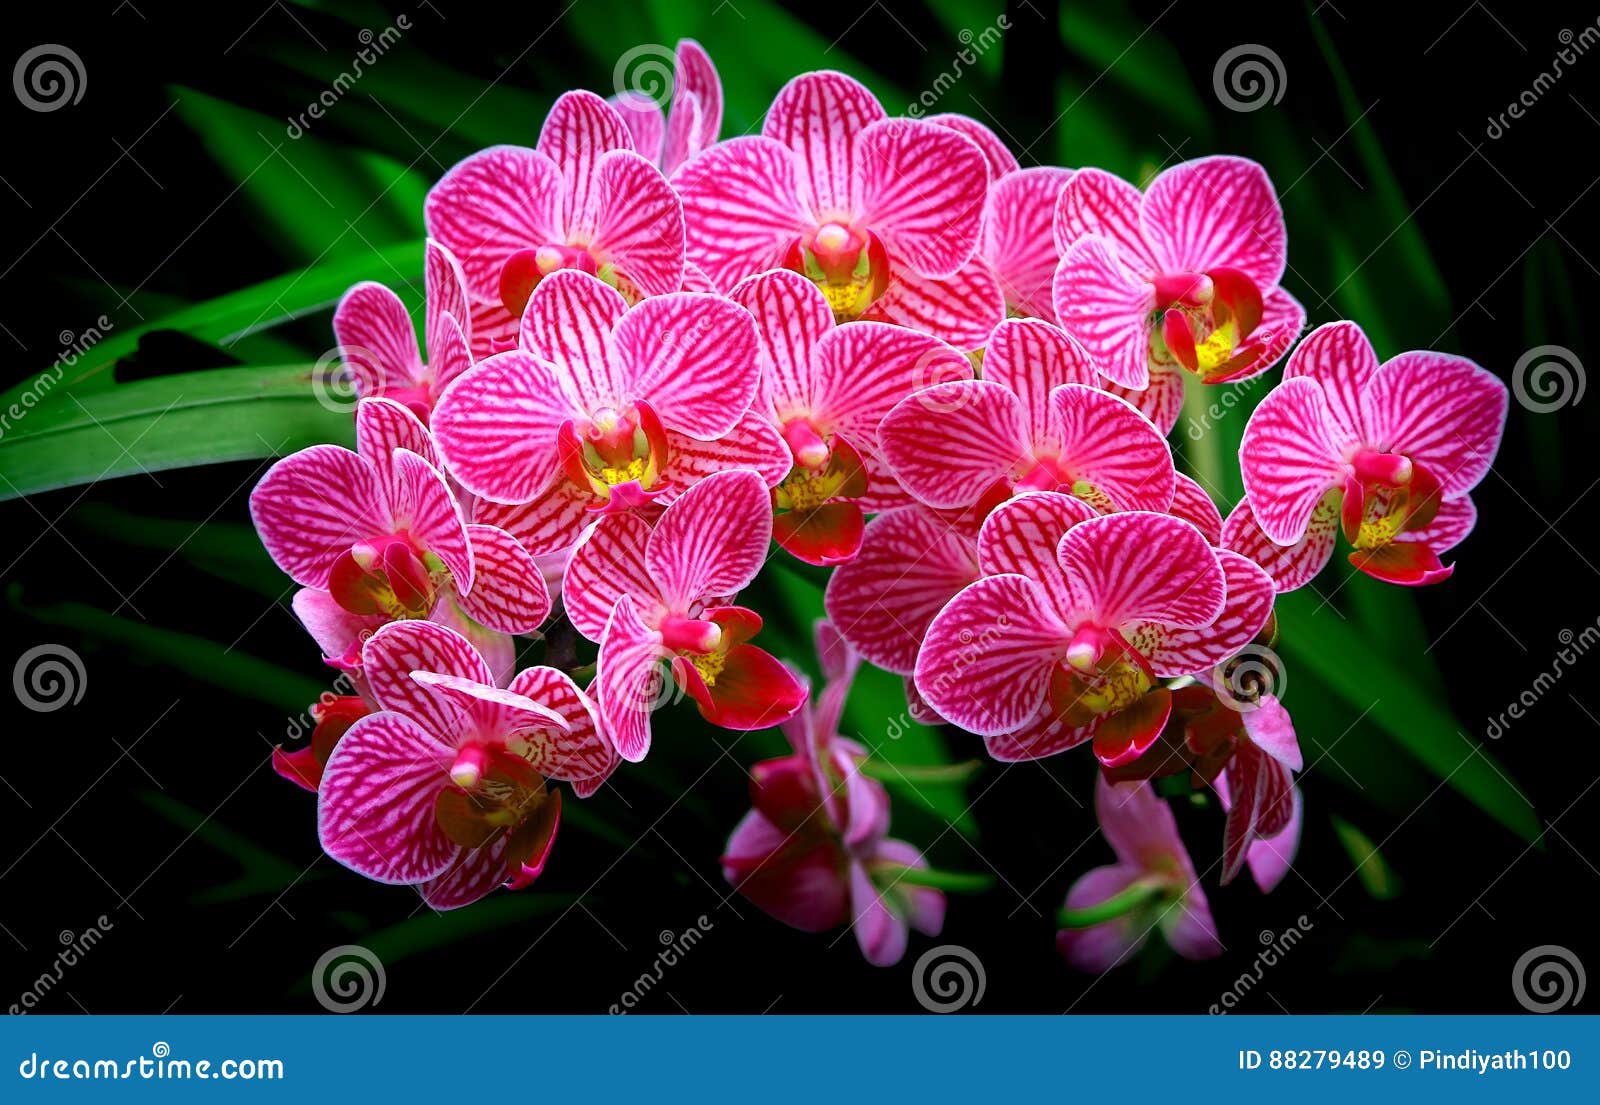 bunch of small pink phalaenopsis orchids